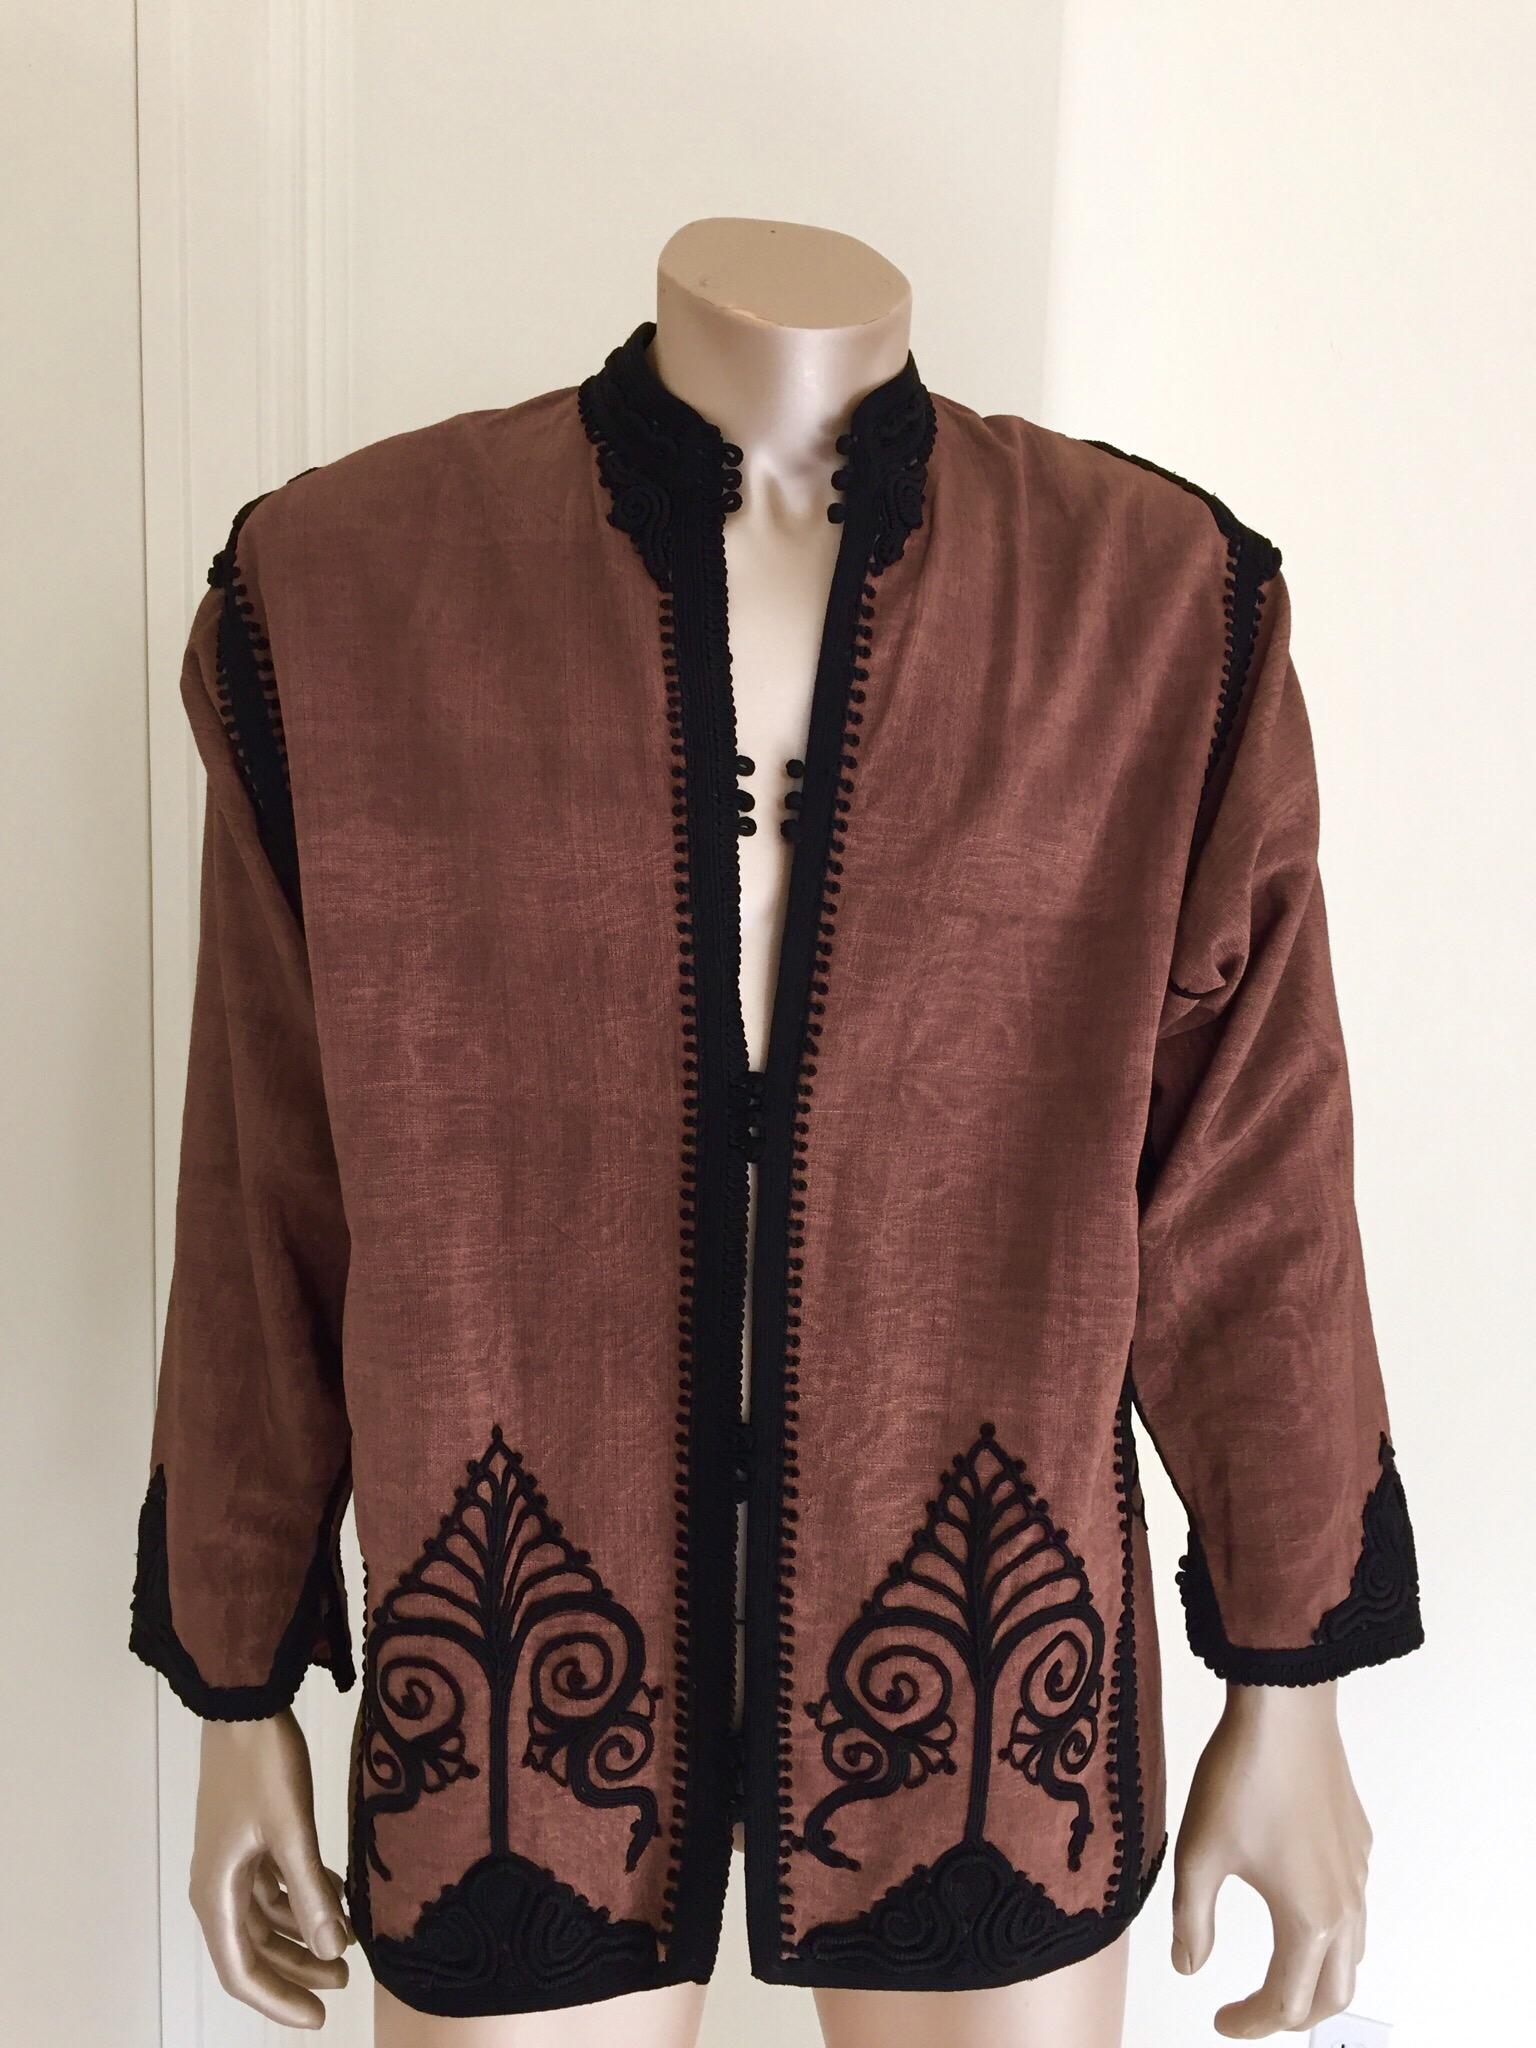 Elegant Moroccan caftan brown and black embroidered,
circa 1960s.
This kaftan is embroidered and embellished entirely by hand.
One of a kind evening Moroccan vest.
The kaftan features a traditional neckline and embellished sleeves.
In Morocco,